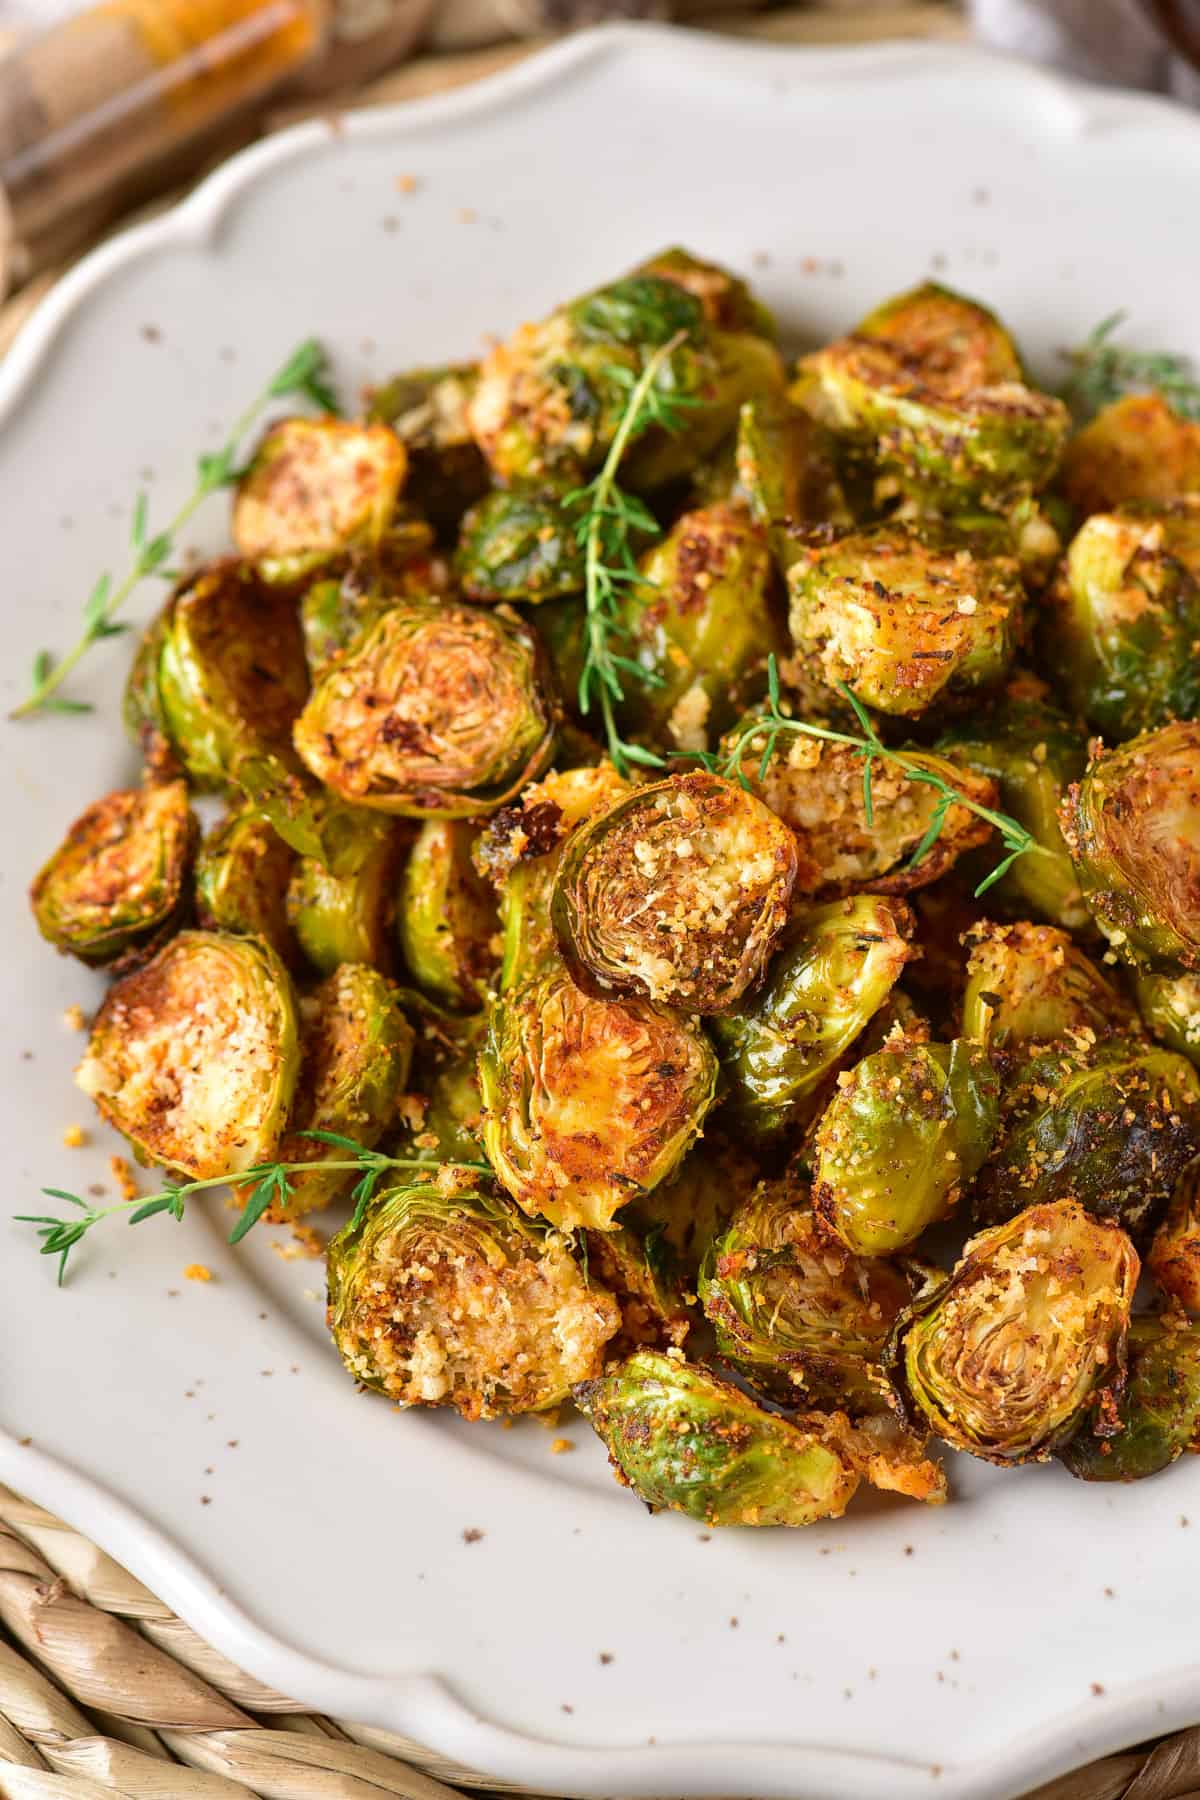 A pile of parmesan brussels sprouts on a plate.